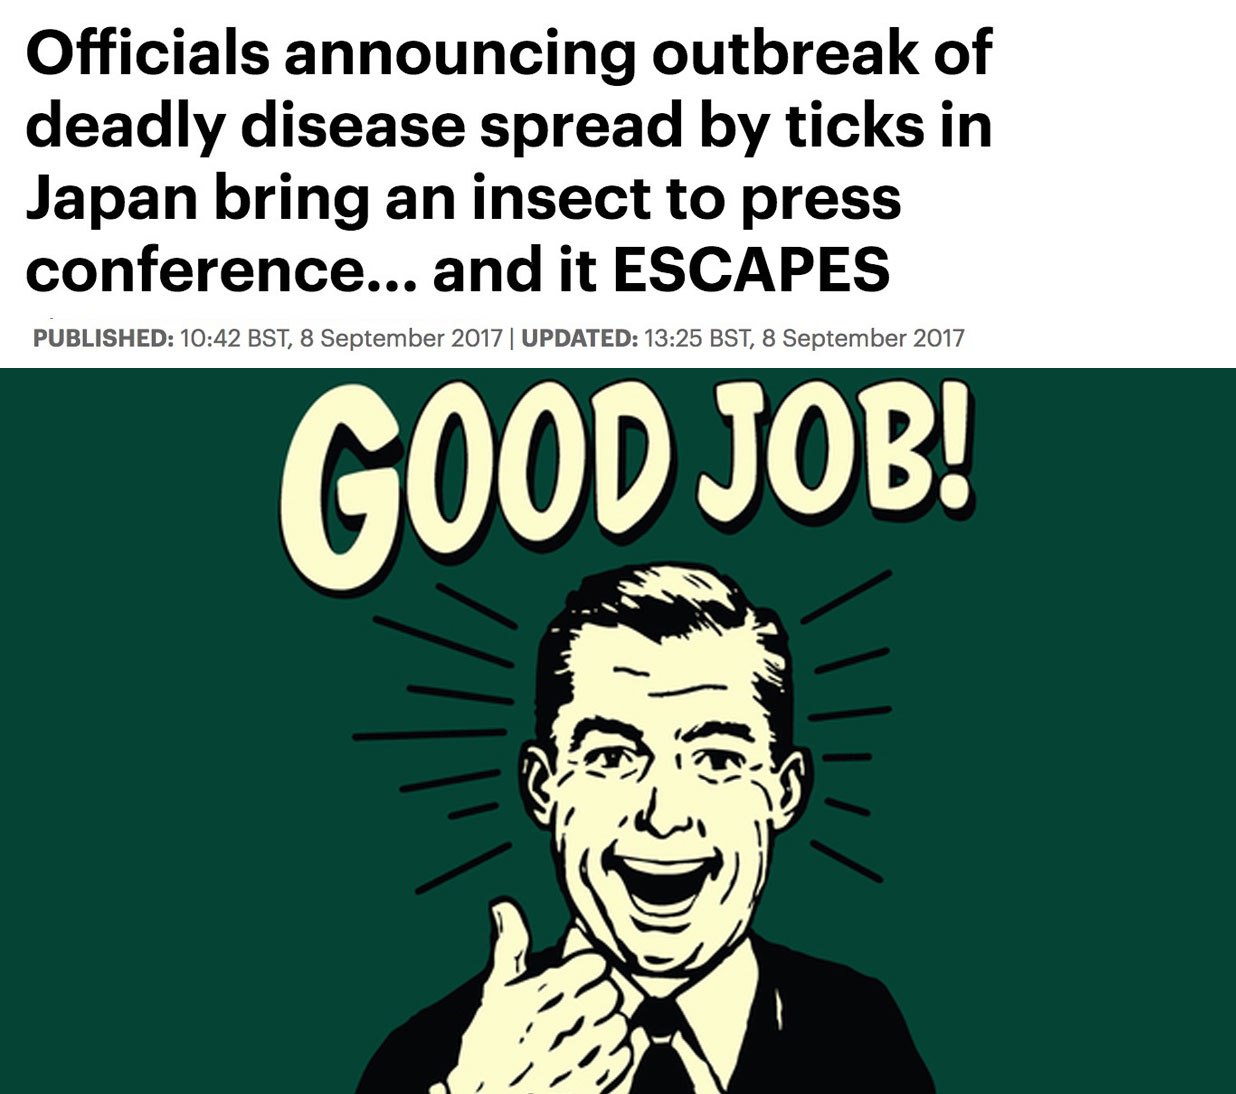 Funny meme about the GREAT JOB they did when announcing a Japanese tick that accidentally escaped when they brought it for the announcement.